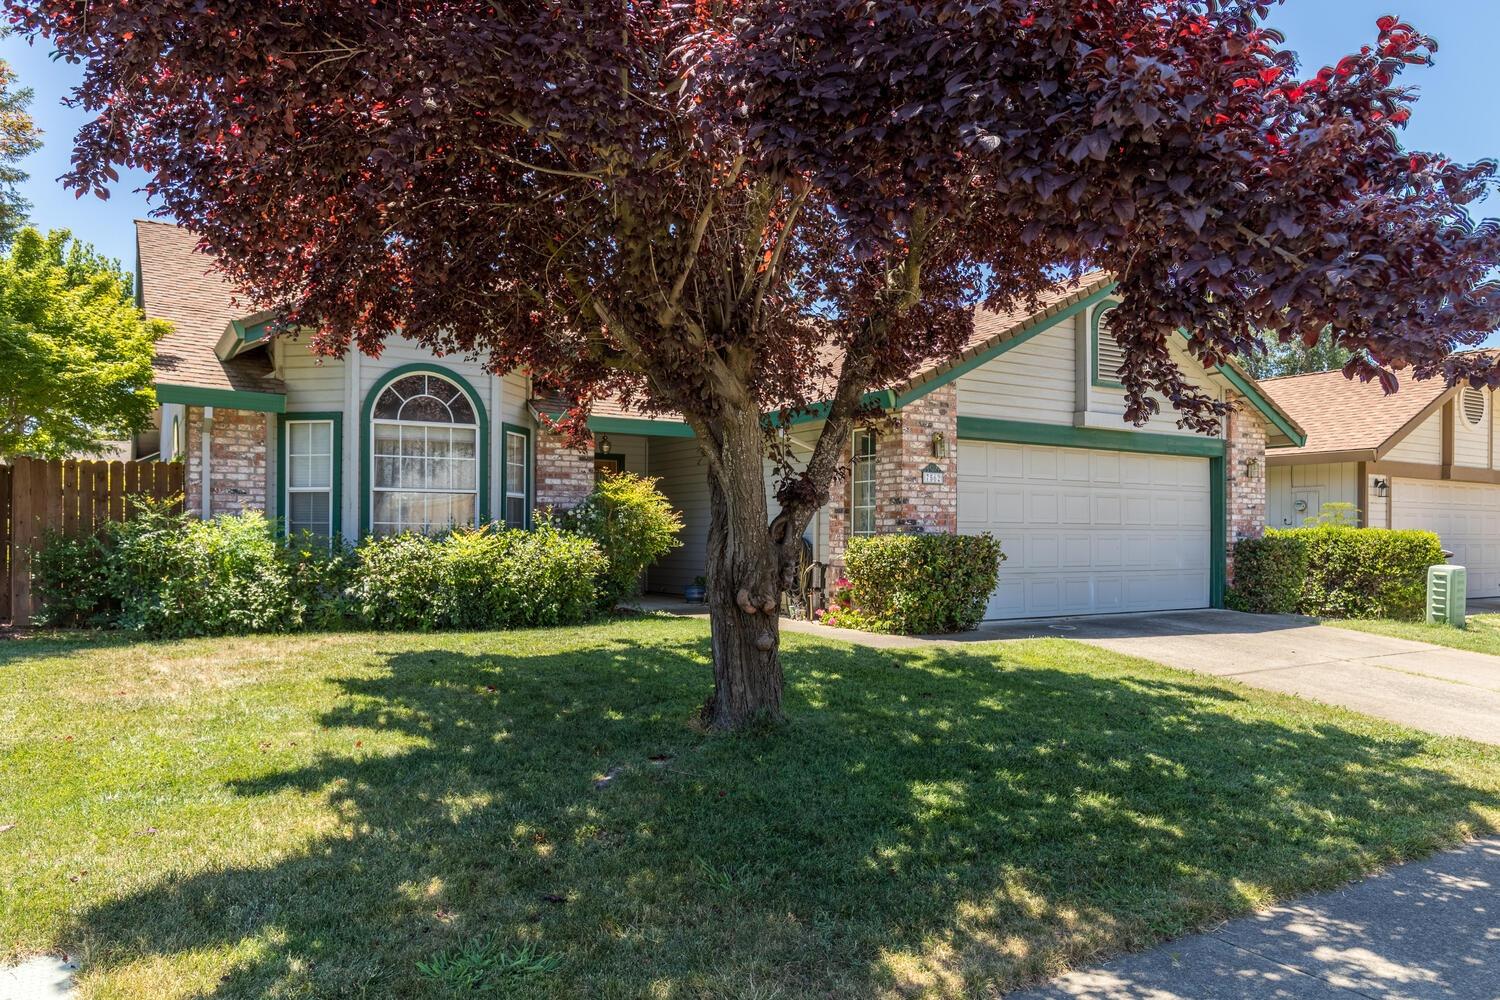 A rare opportunity! Check out this adorable Citrus Heights home being sold by original owner----and 